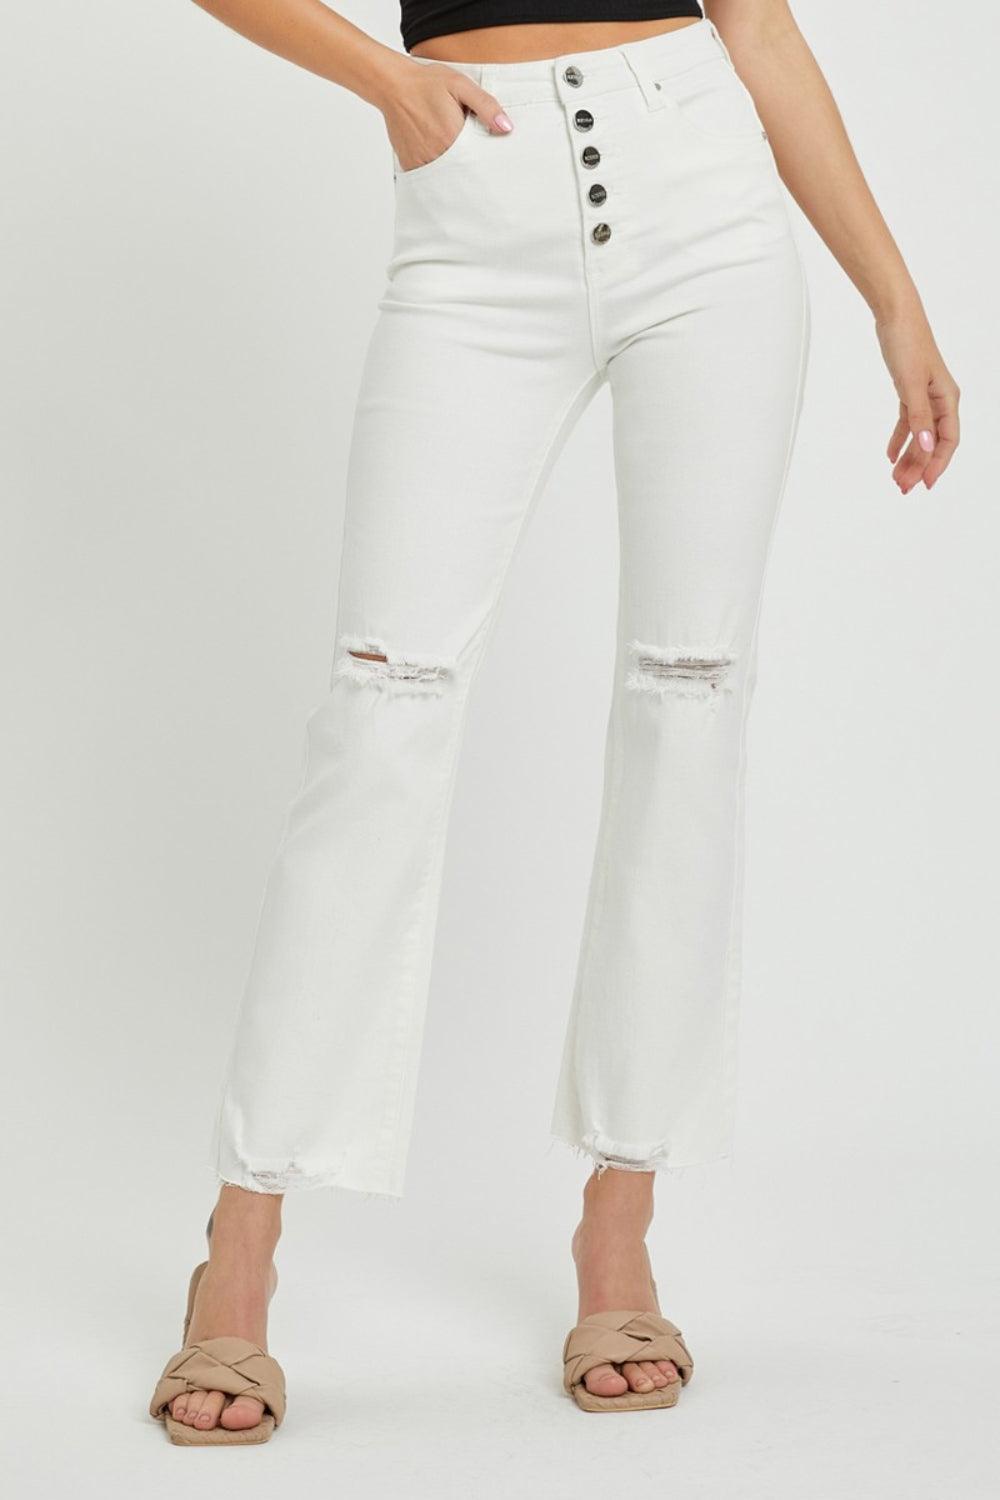 RISEN Full Size High Rise Button Fly Straight Ankle Jeans White Jeans